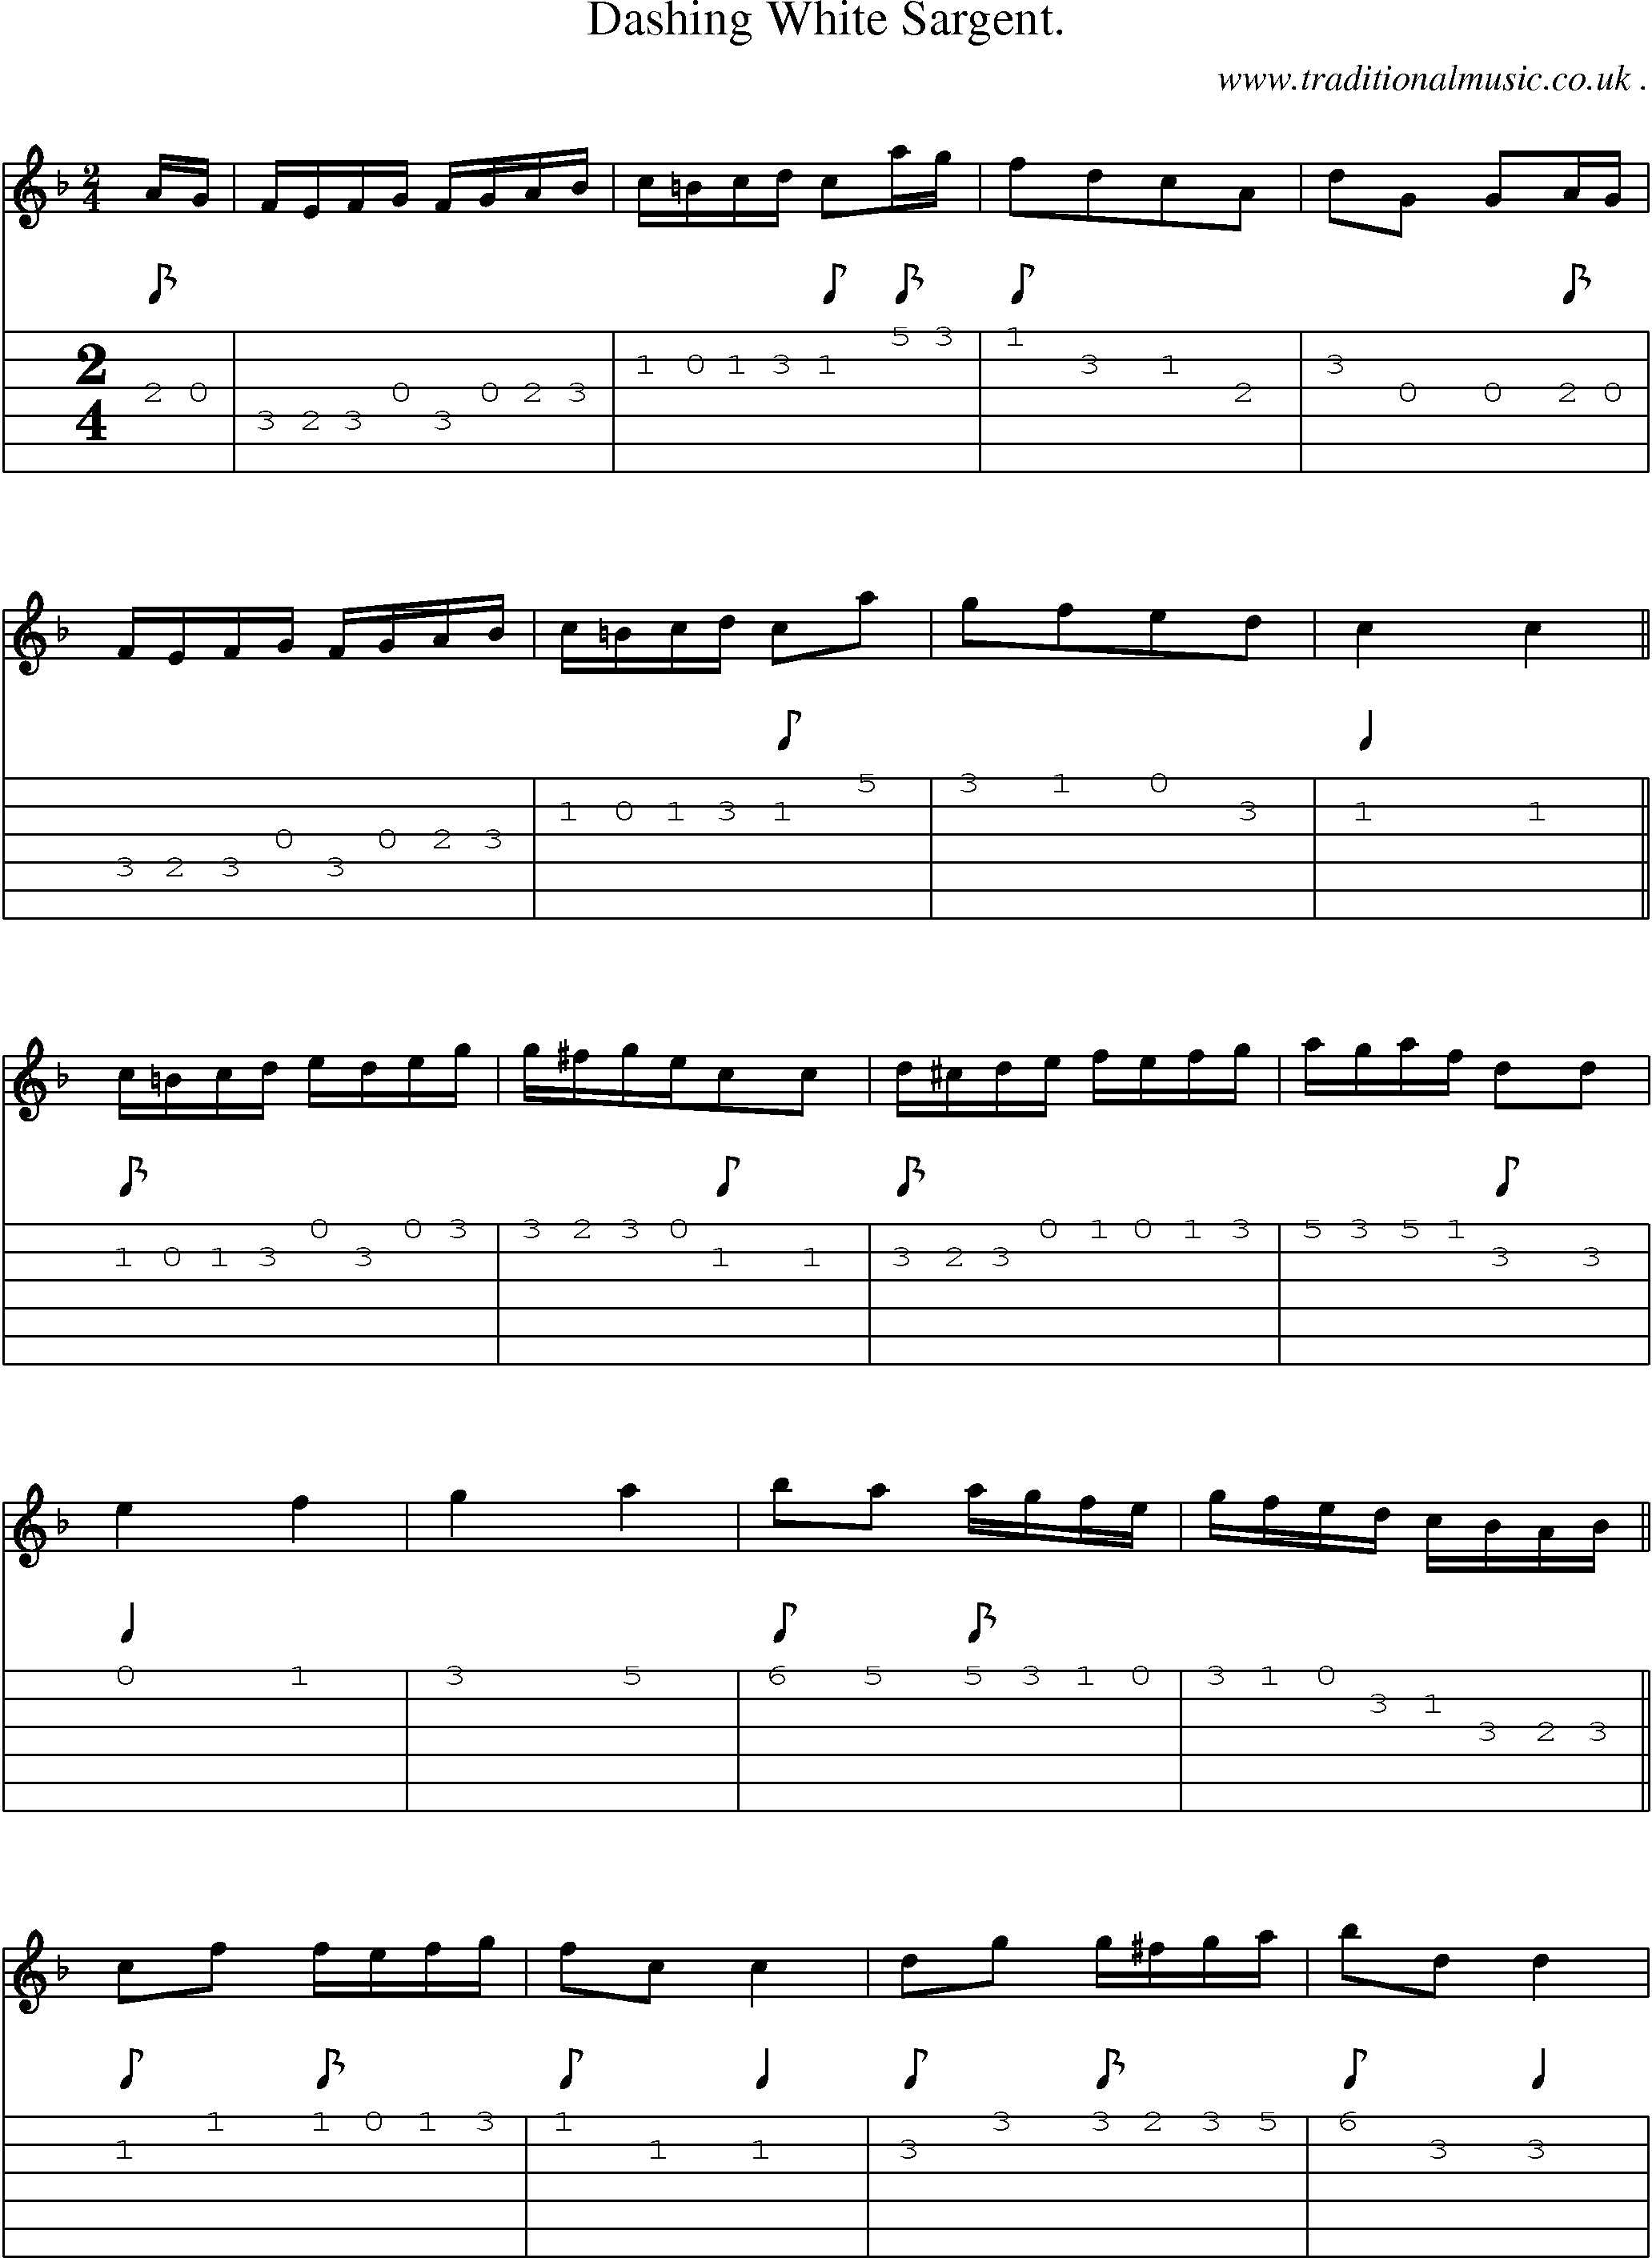 Sheet-Music and Guitar Tabs for Dashing White Sargent